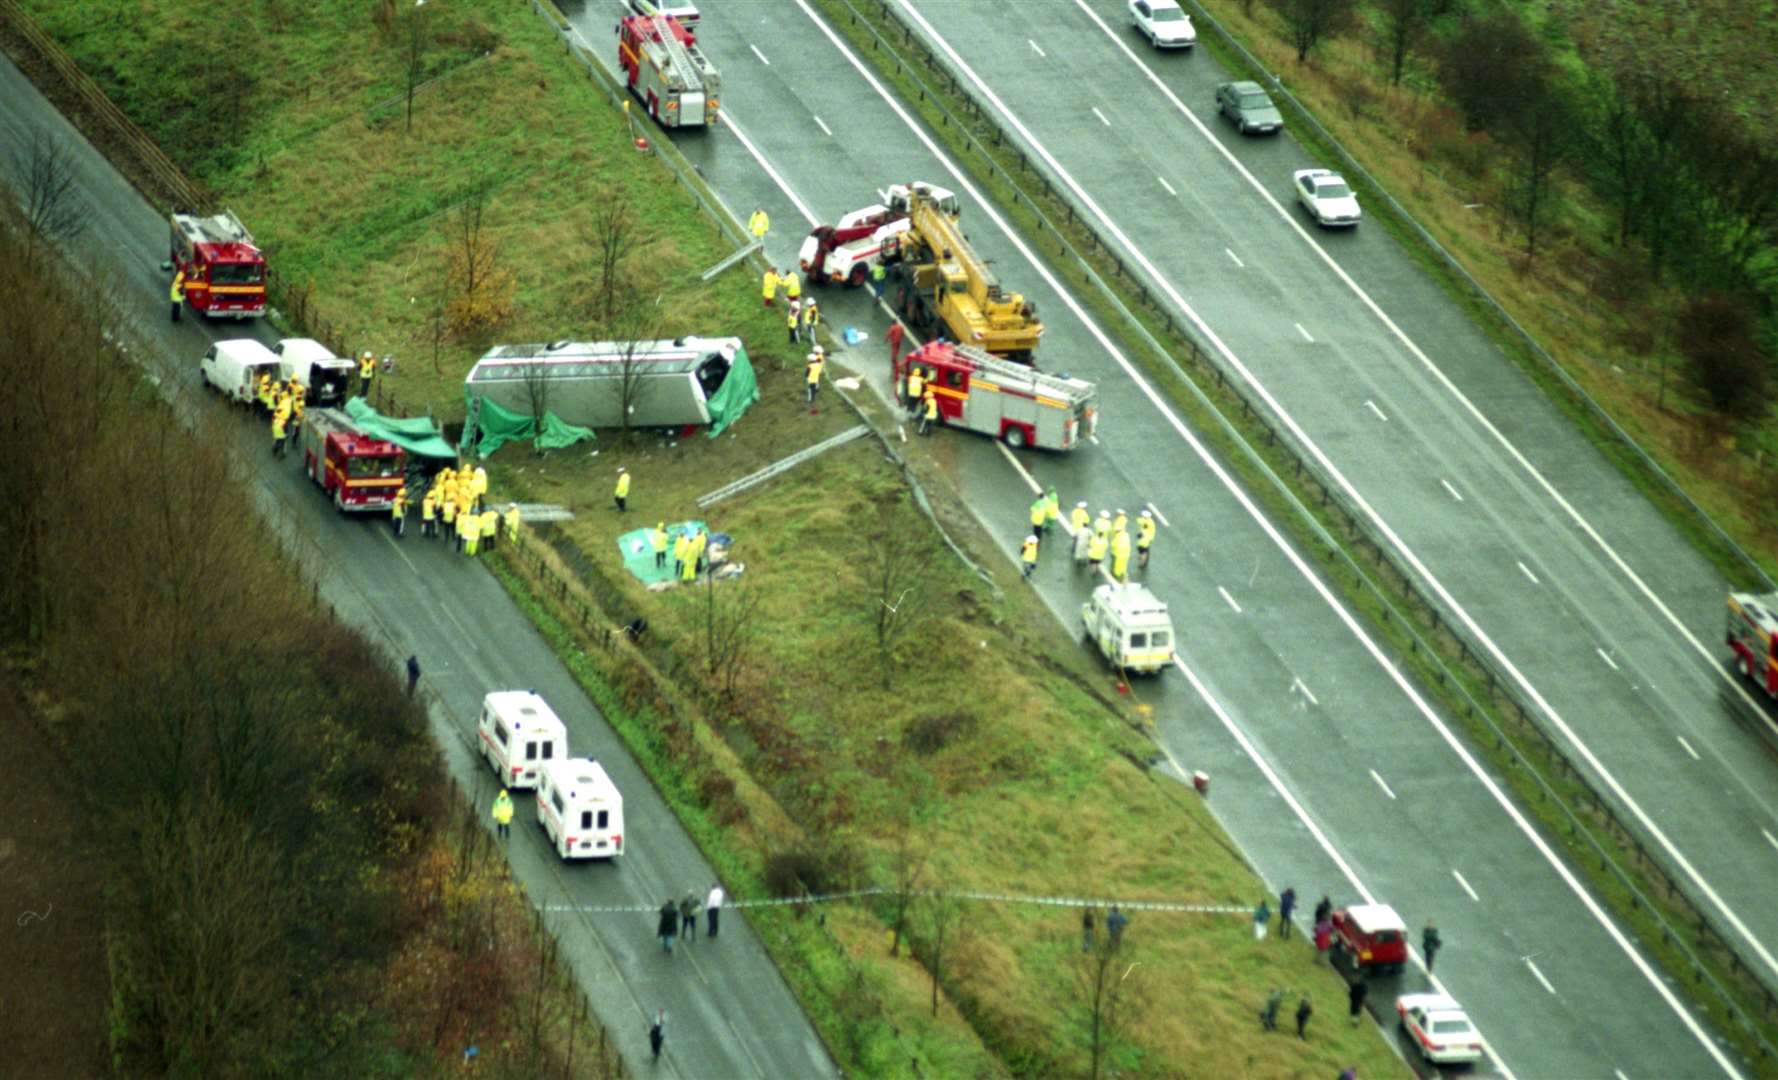 An aerial picture of the scene on the day of the accident